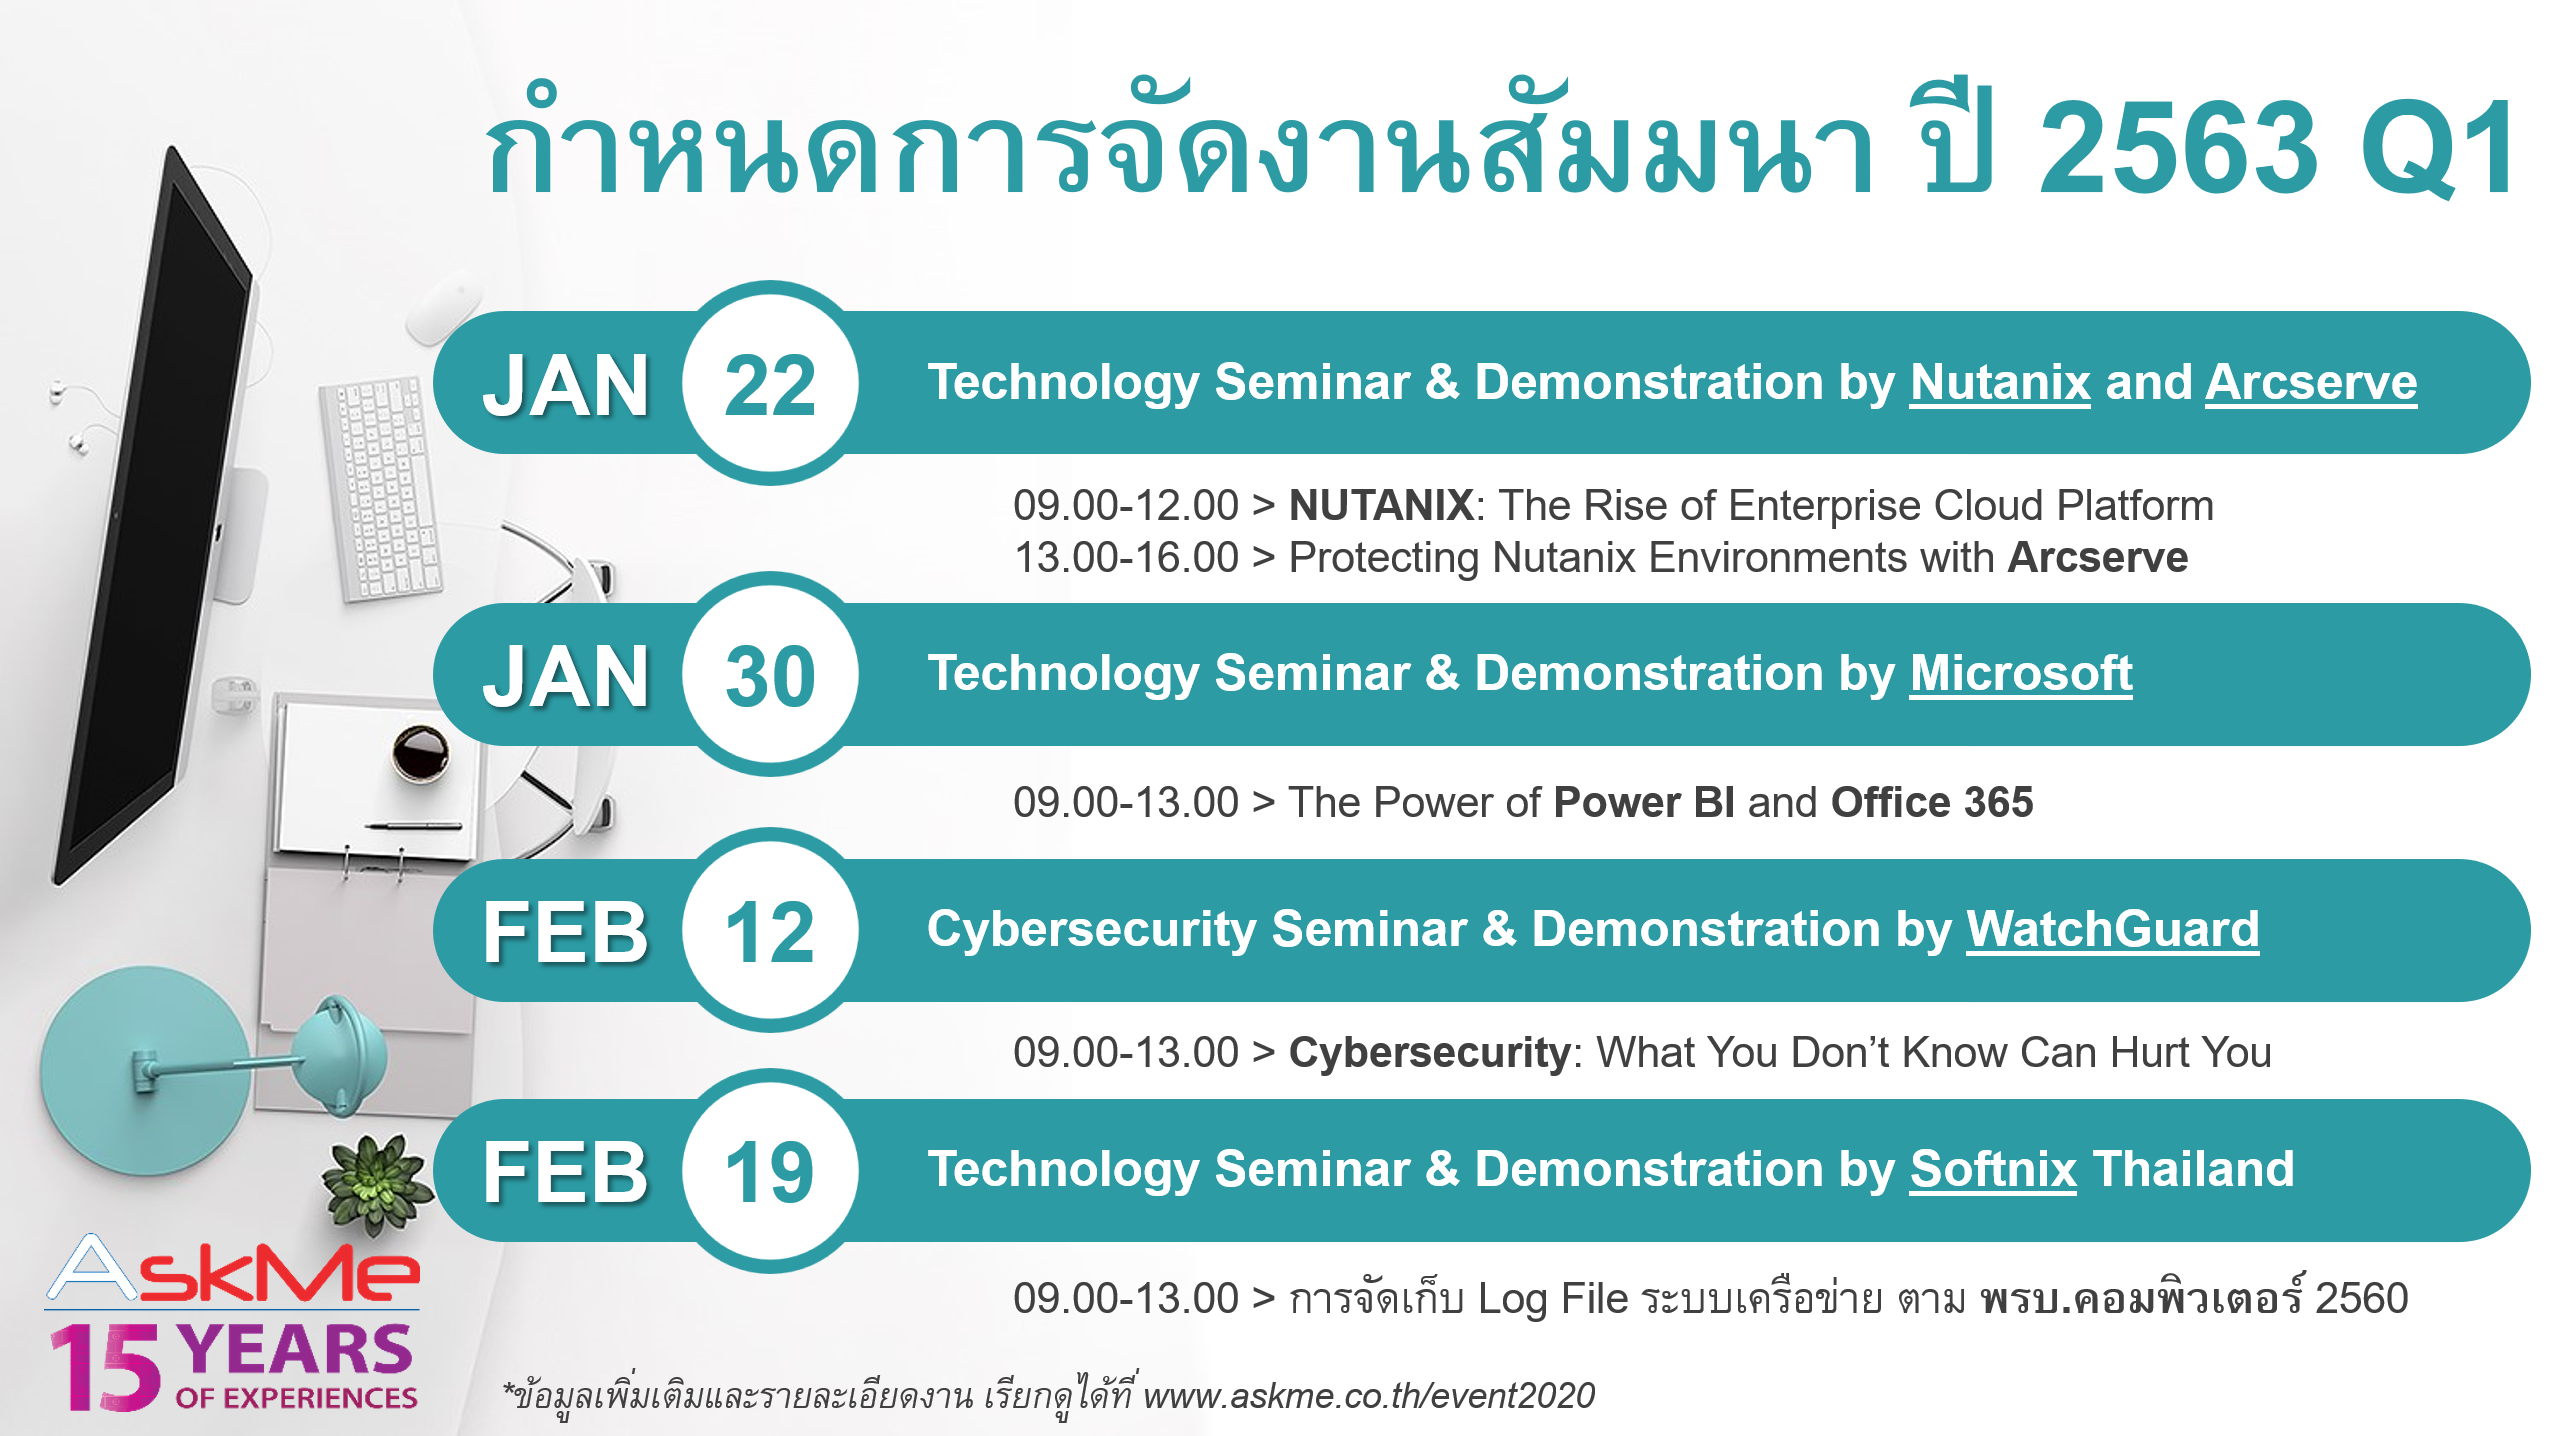 Seminar: AskMe - Technology Update and Demonstration 2020